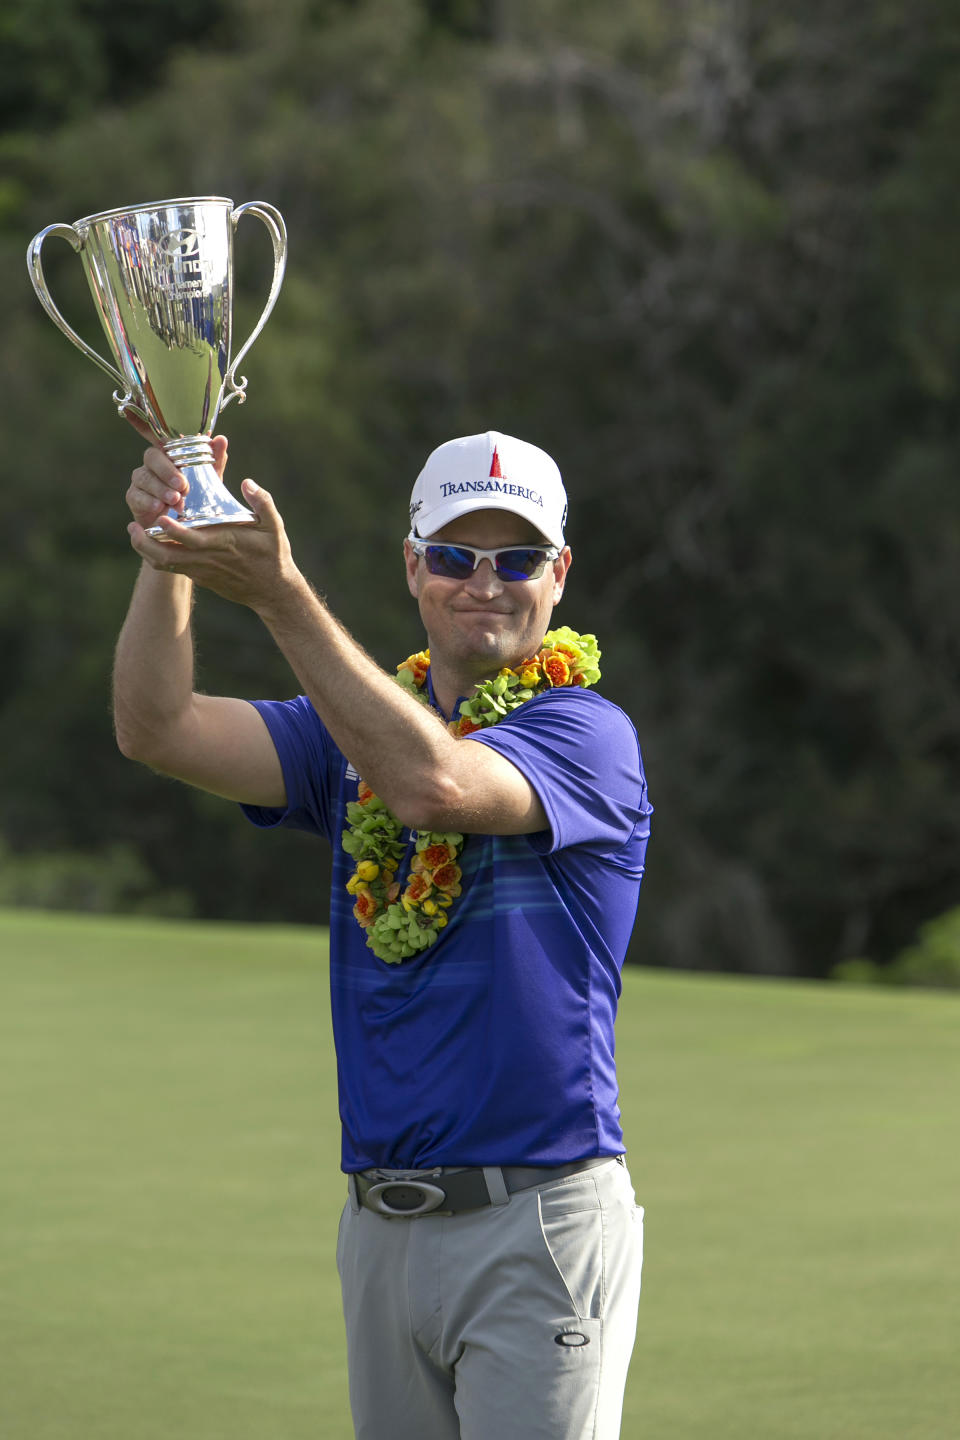 Zach Johnson holds the first place trophy after winning the Tournament of Champions golf tournament, Monday, Jan. 6, 2014, in Kapalua, Hawaii. Johnson pulled away with three straight birdies on the back nine at Kapalua and closed with a 7-under 66 for a one-shot victory over Jordan Spieth on Monday. (AP Photo/Marco Garcia)